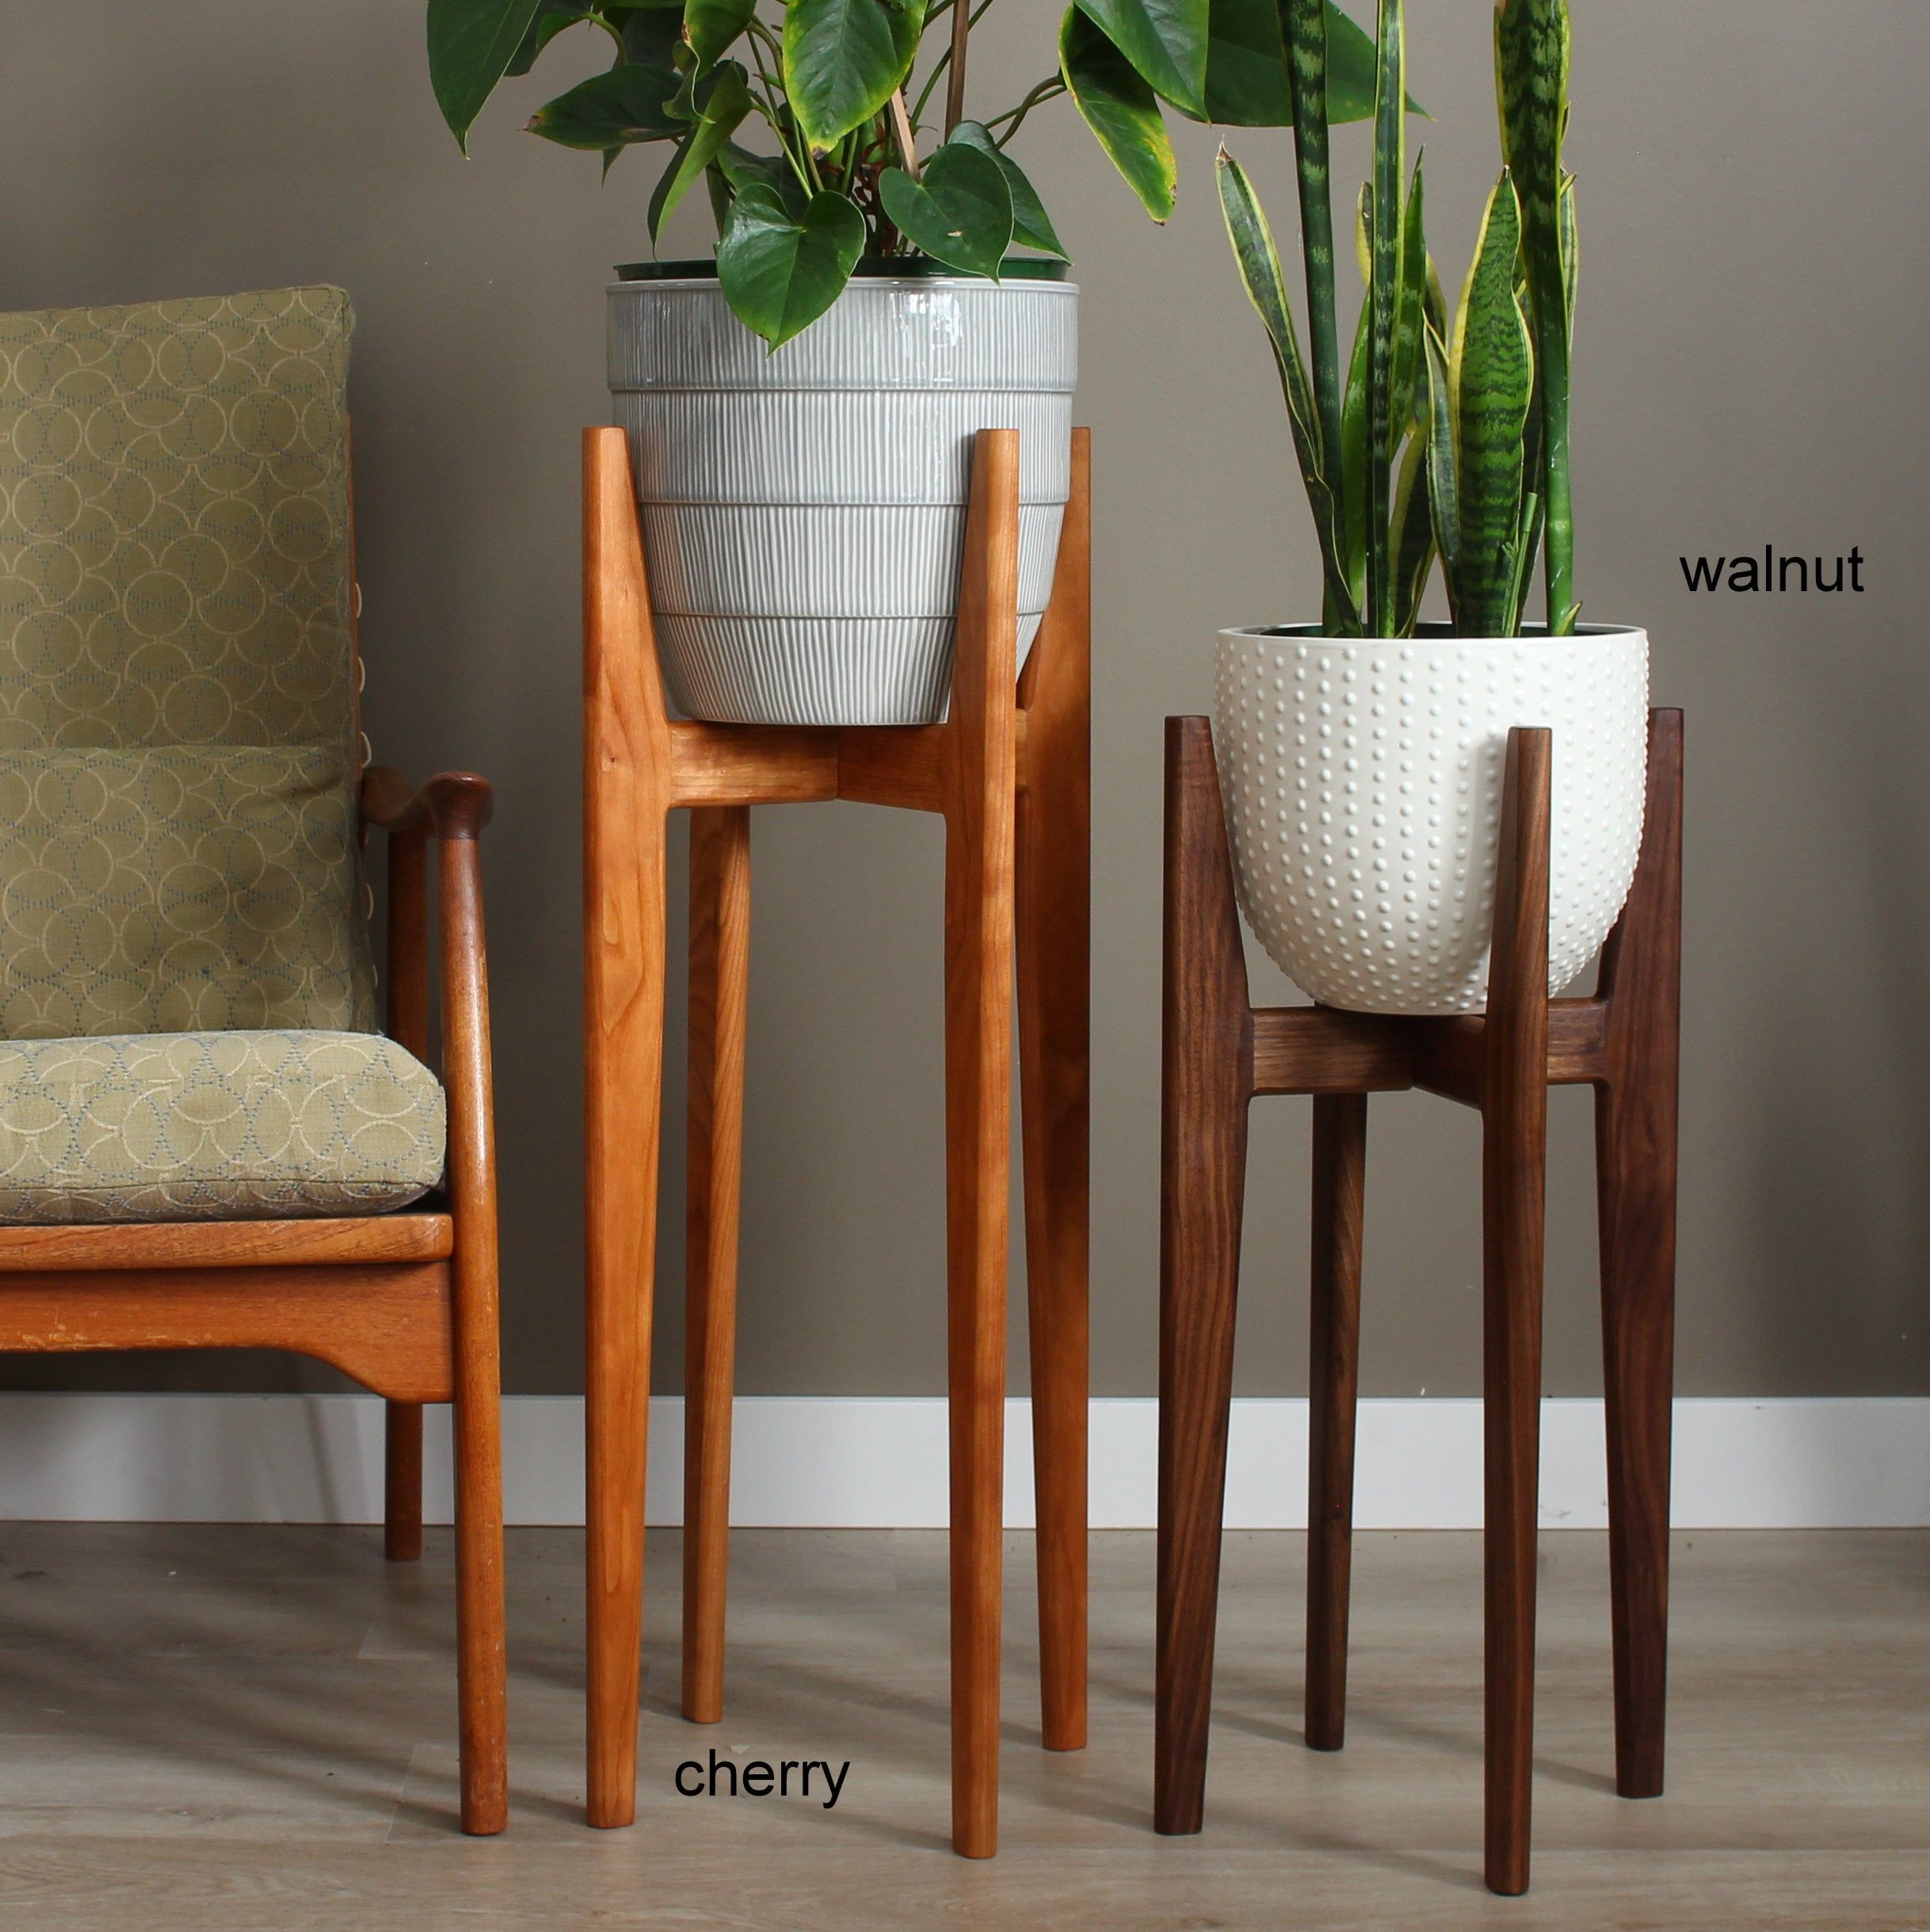 Mid Century Modern Plant Stand Our Original Design Indoor – Etsy Throughout Cherry Pedestal Plant Stands (View 4 of 15)